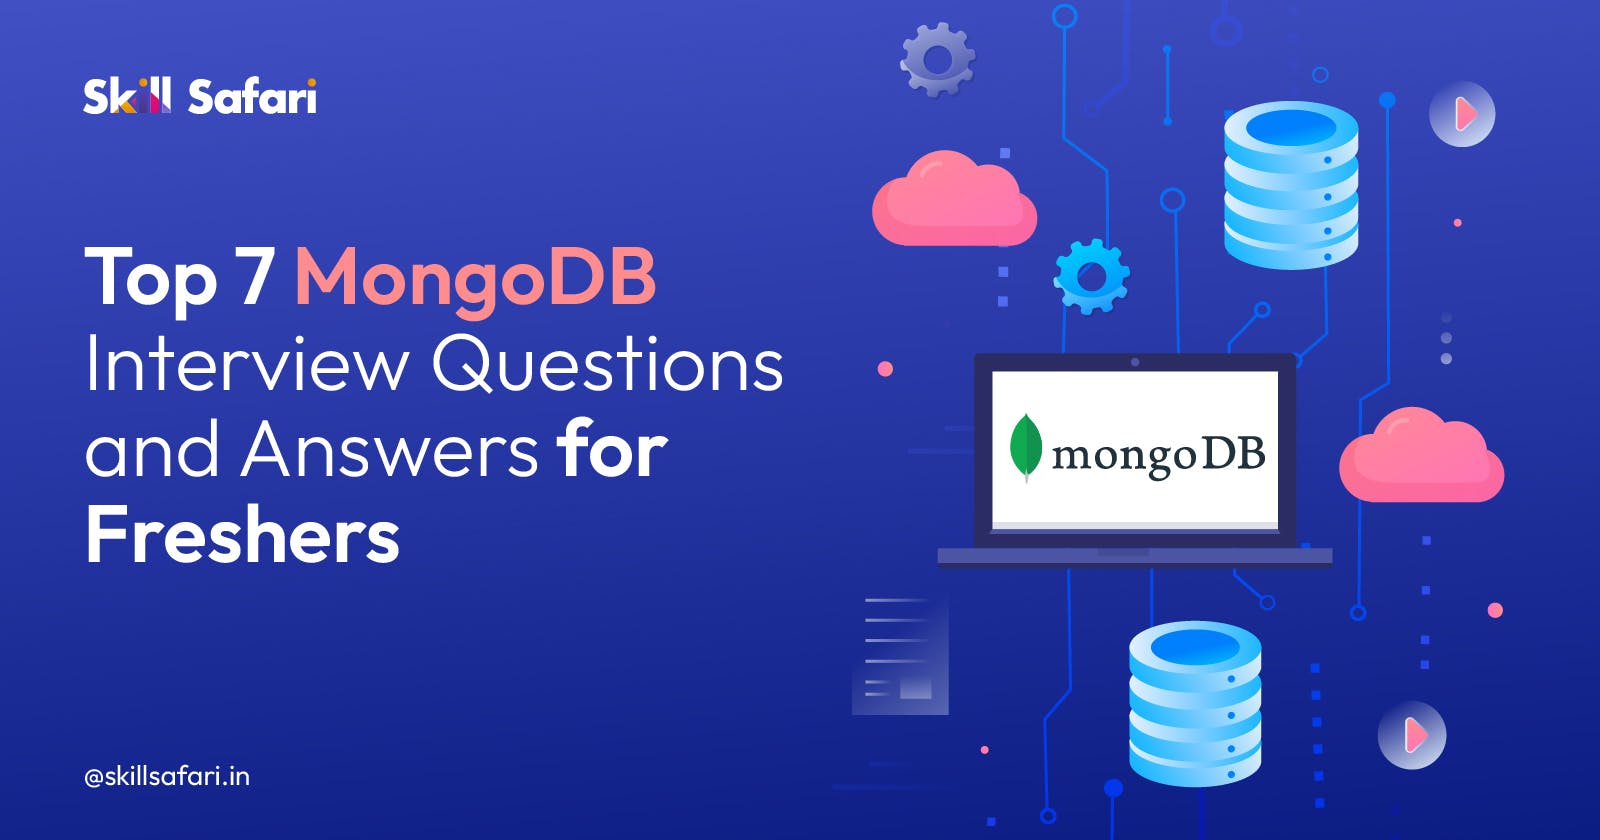 Top 7 MongoDB Interview Questions and Answers for Freshers